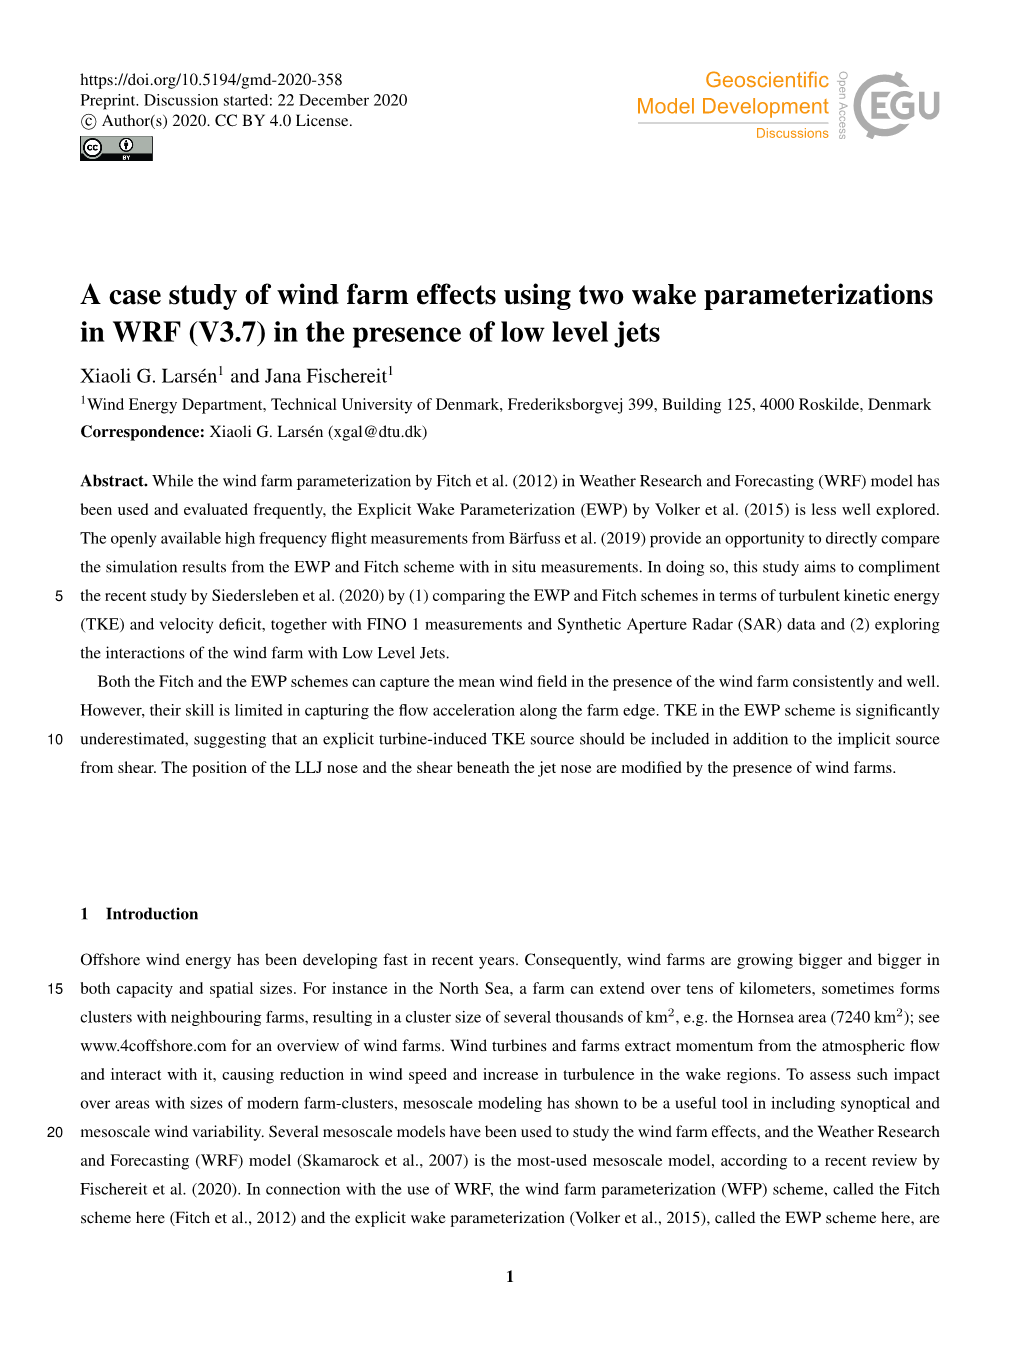 A Case Study of Wind Farm Effects Using Two Wake Parameterizations in WRF (V3.7) in the Presence of Low Level Jets Xiaoli G